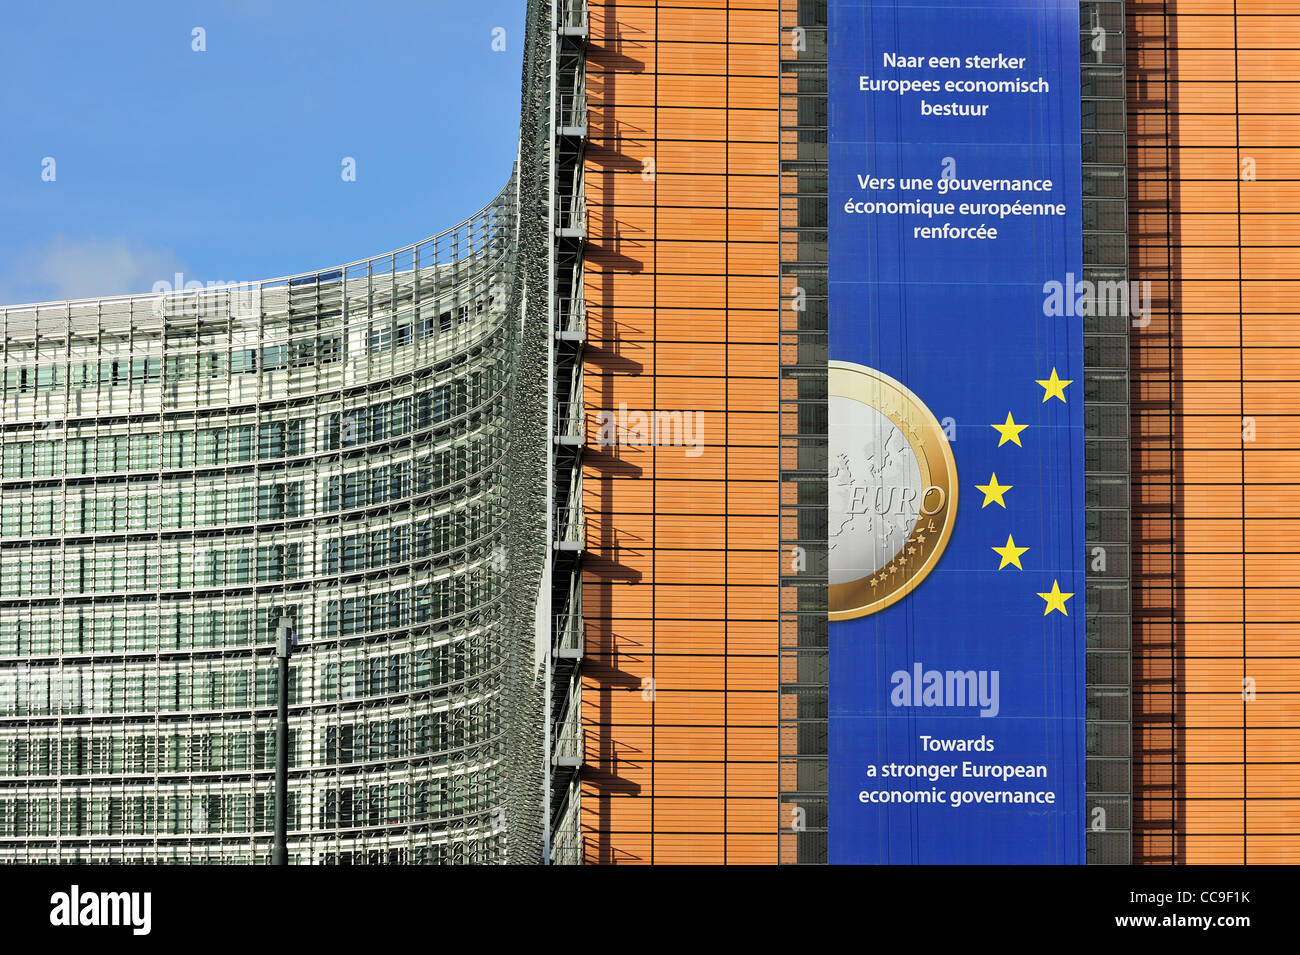 The European Commission, executive body of the European Union, based in the Berlaymont building of Brussels, Belgium Stock Photo